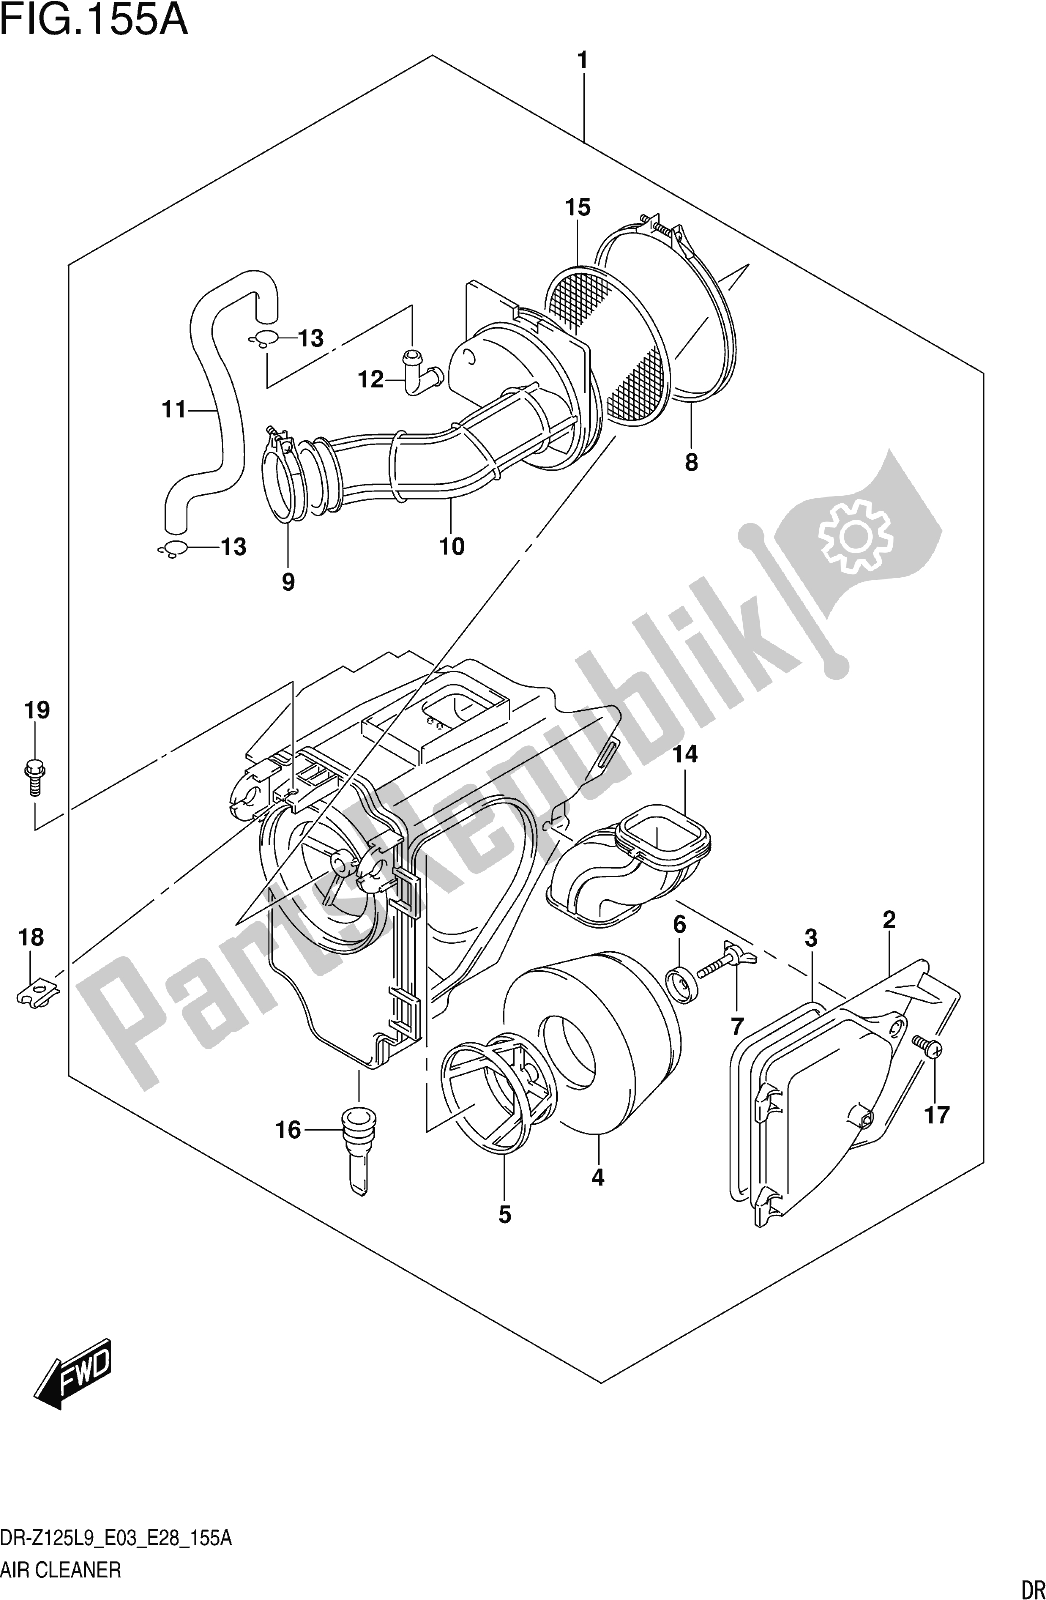 All parts for the Fig. 155a Air Cleaner of the Suzuki DR-Z 125 2019